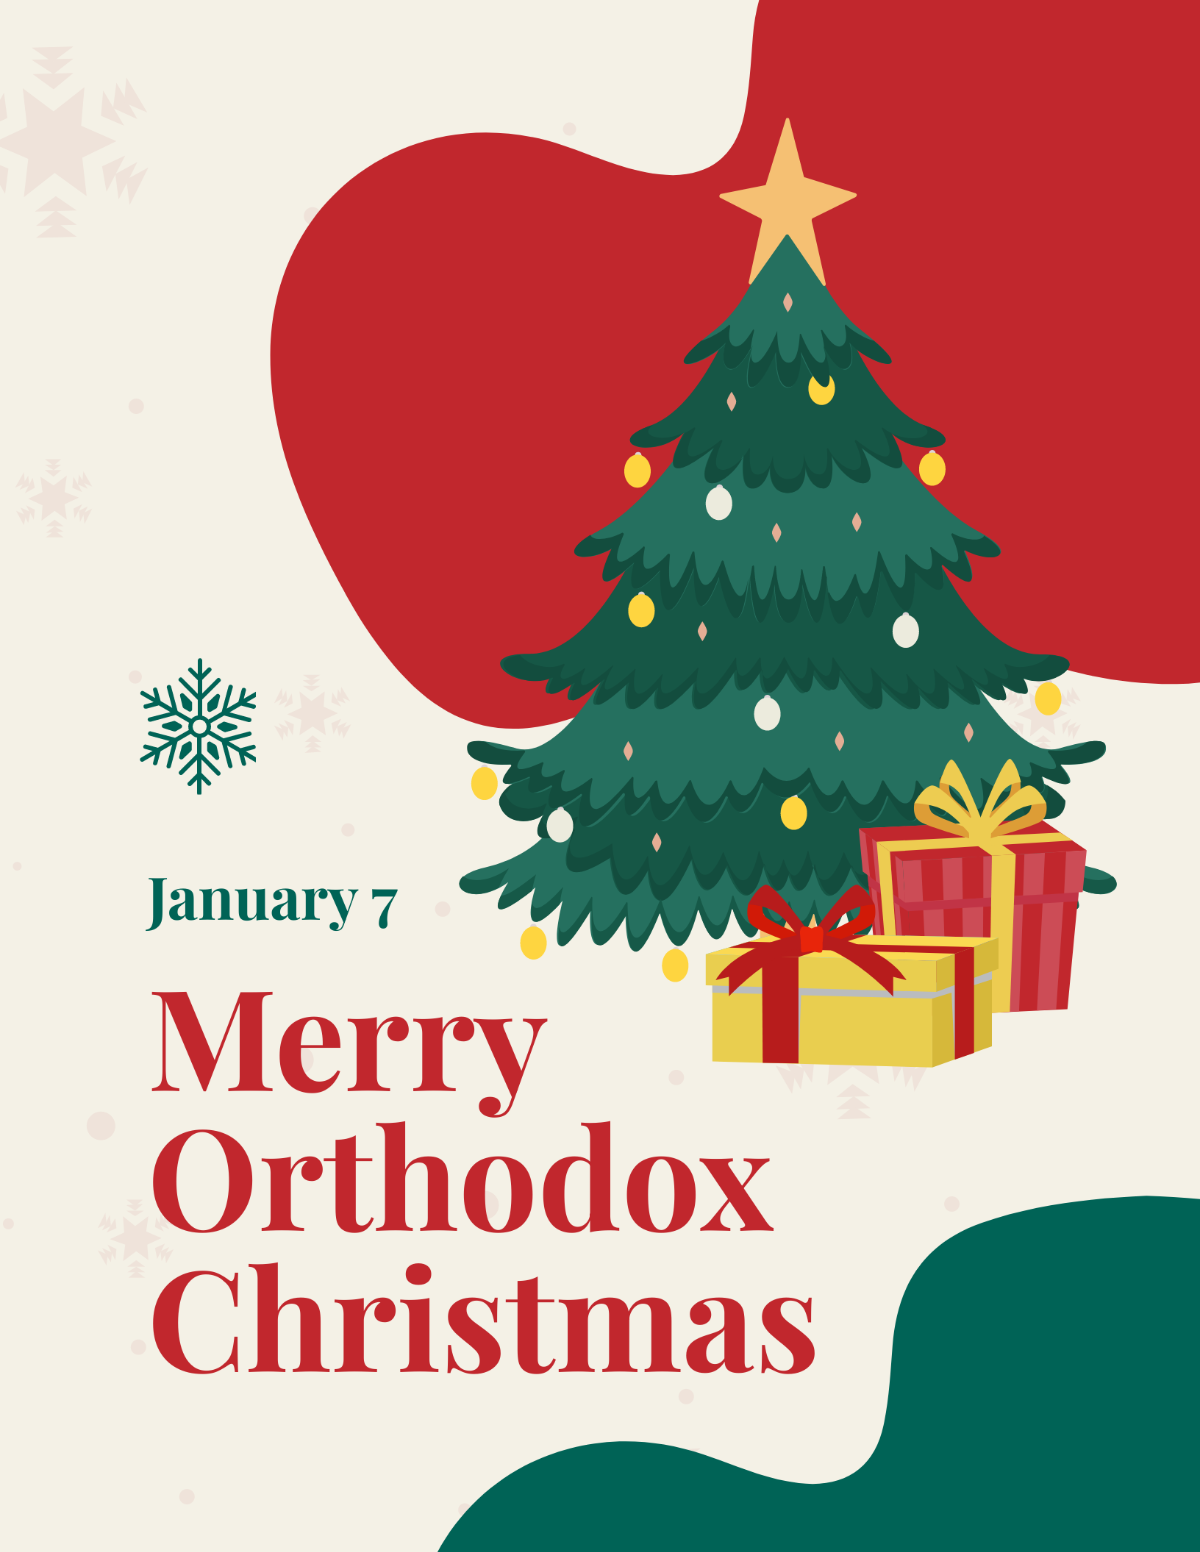 Merry Orthodox Christmas Flyer Template